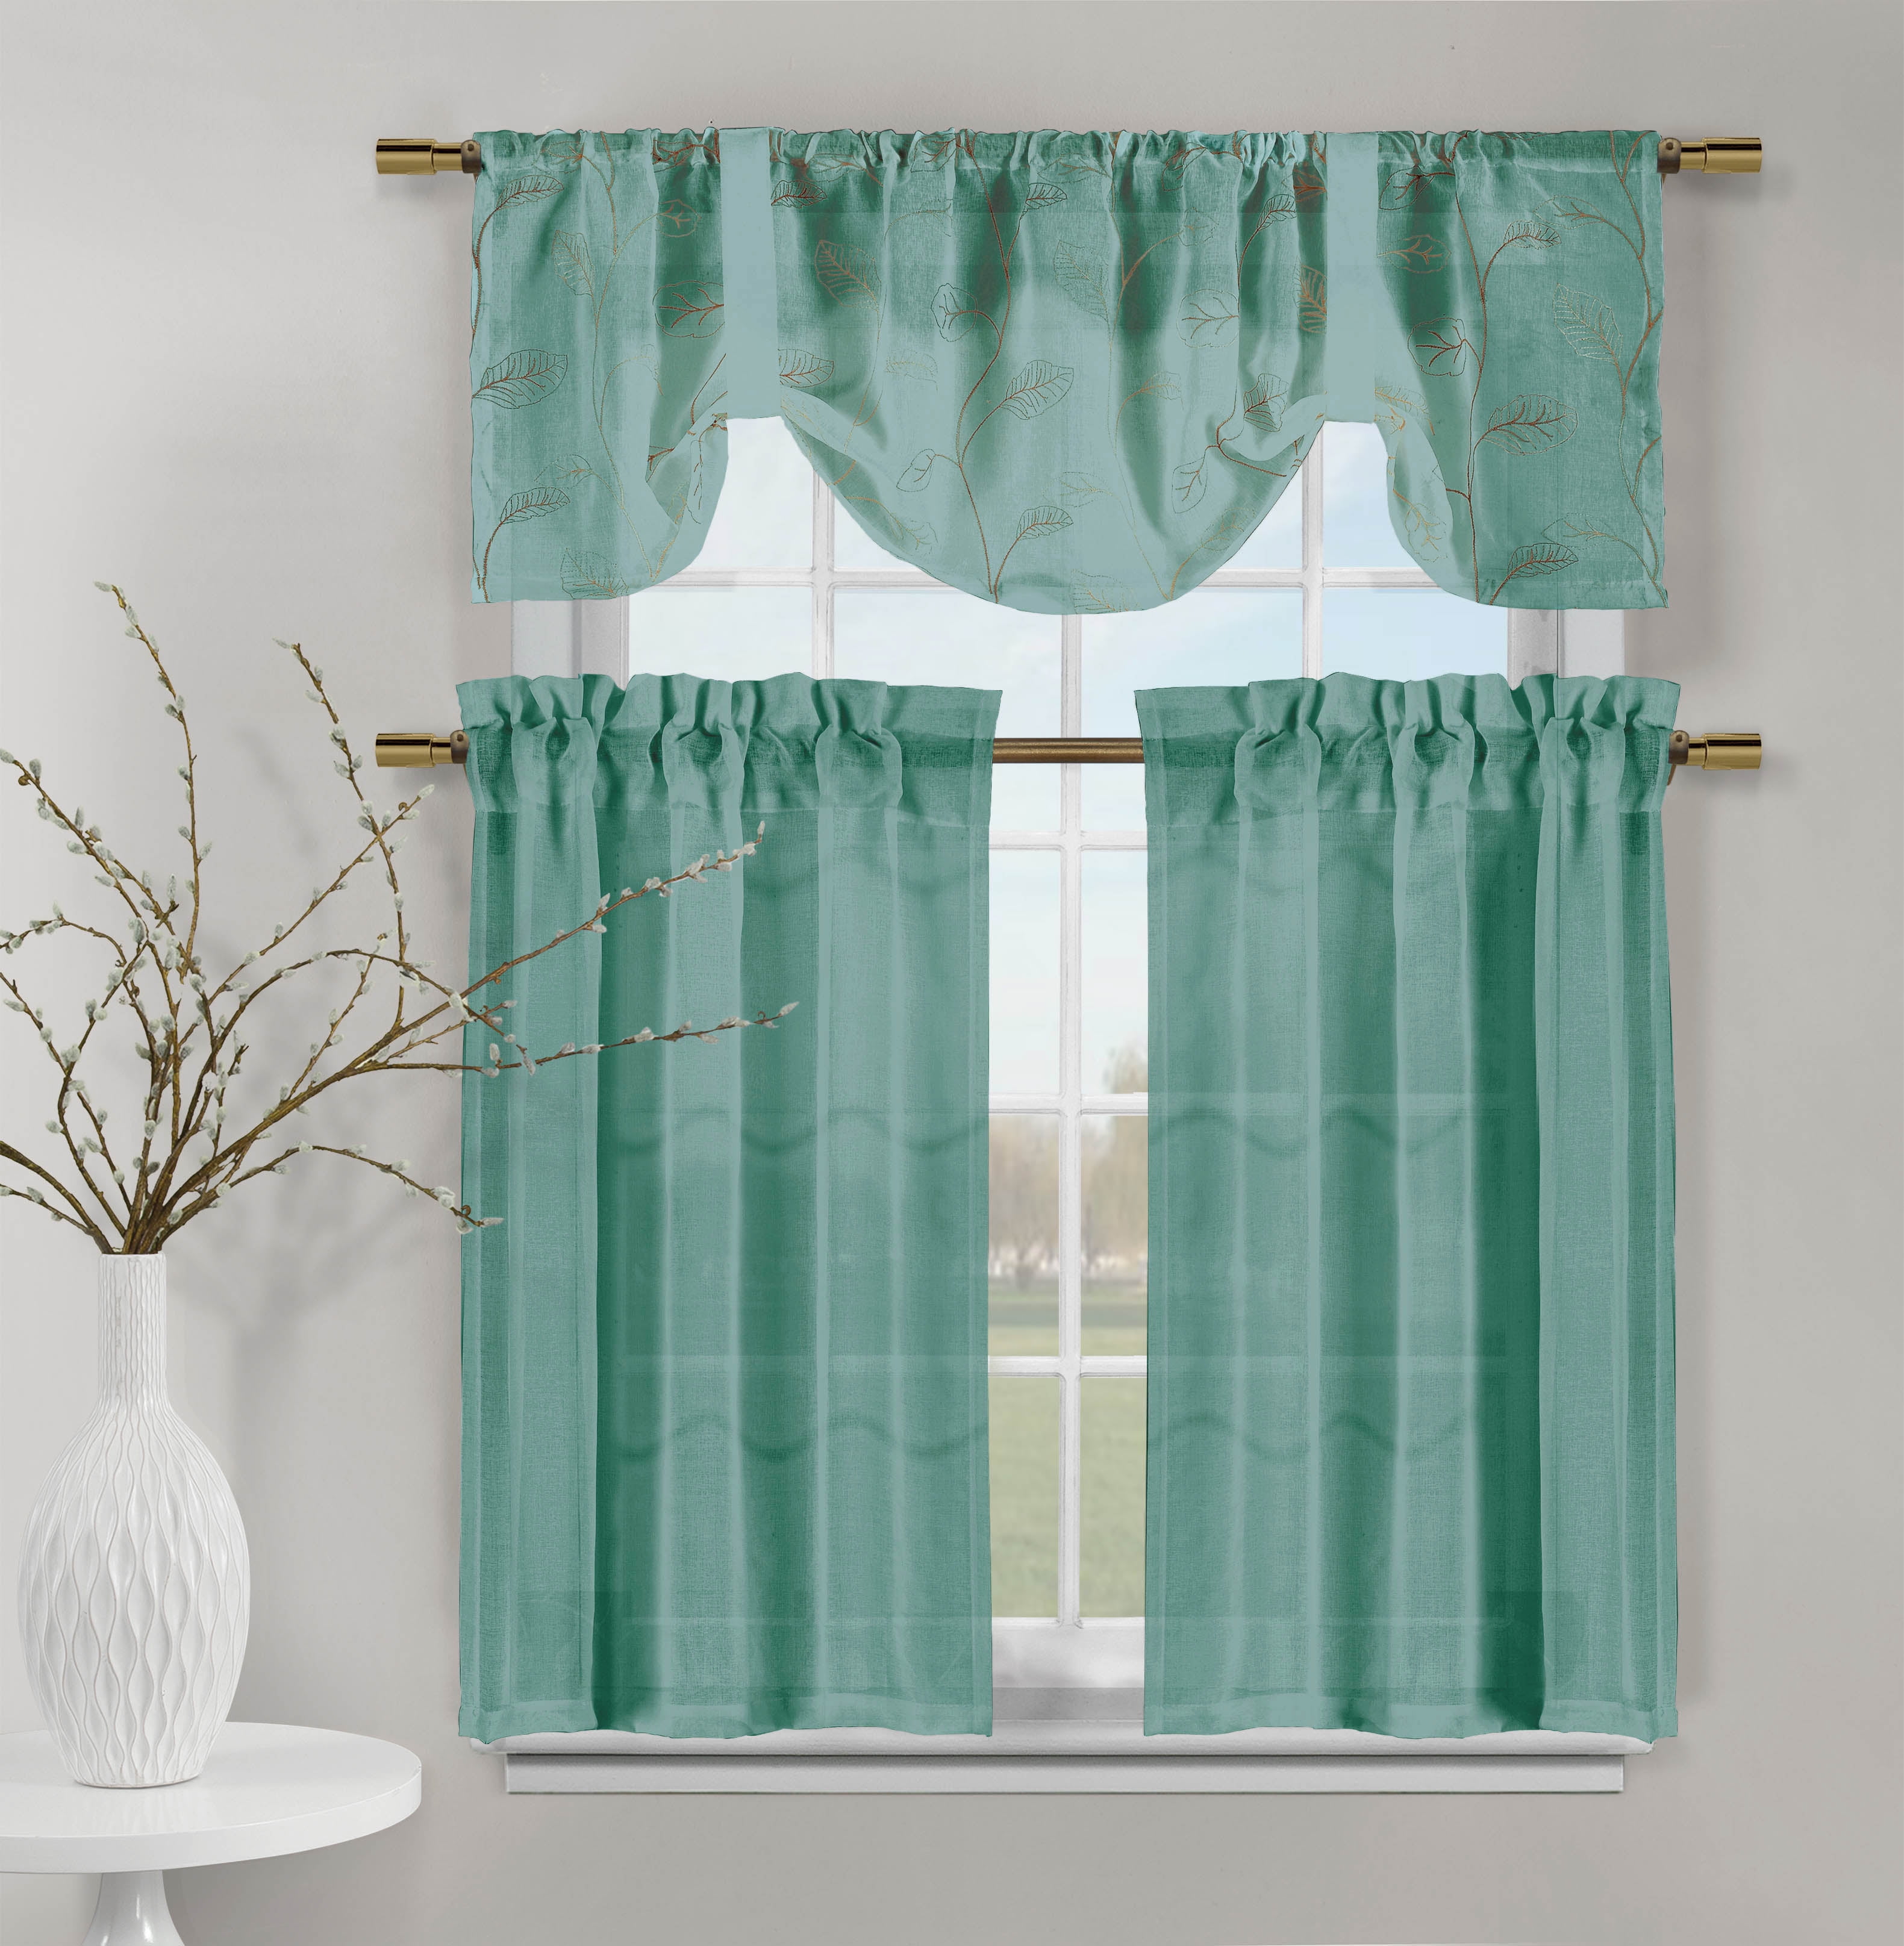 Teal 3 Piece Set of Embroidered Kitchen Window Panels: Sheer, Rod ...